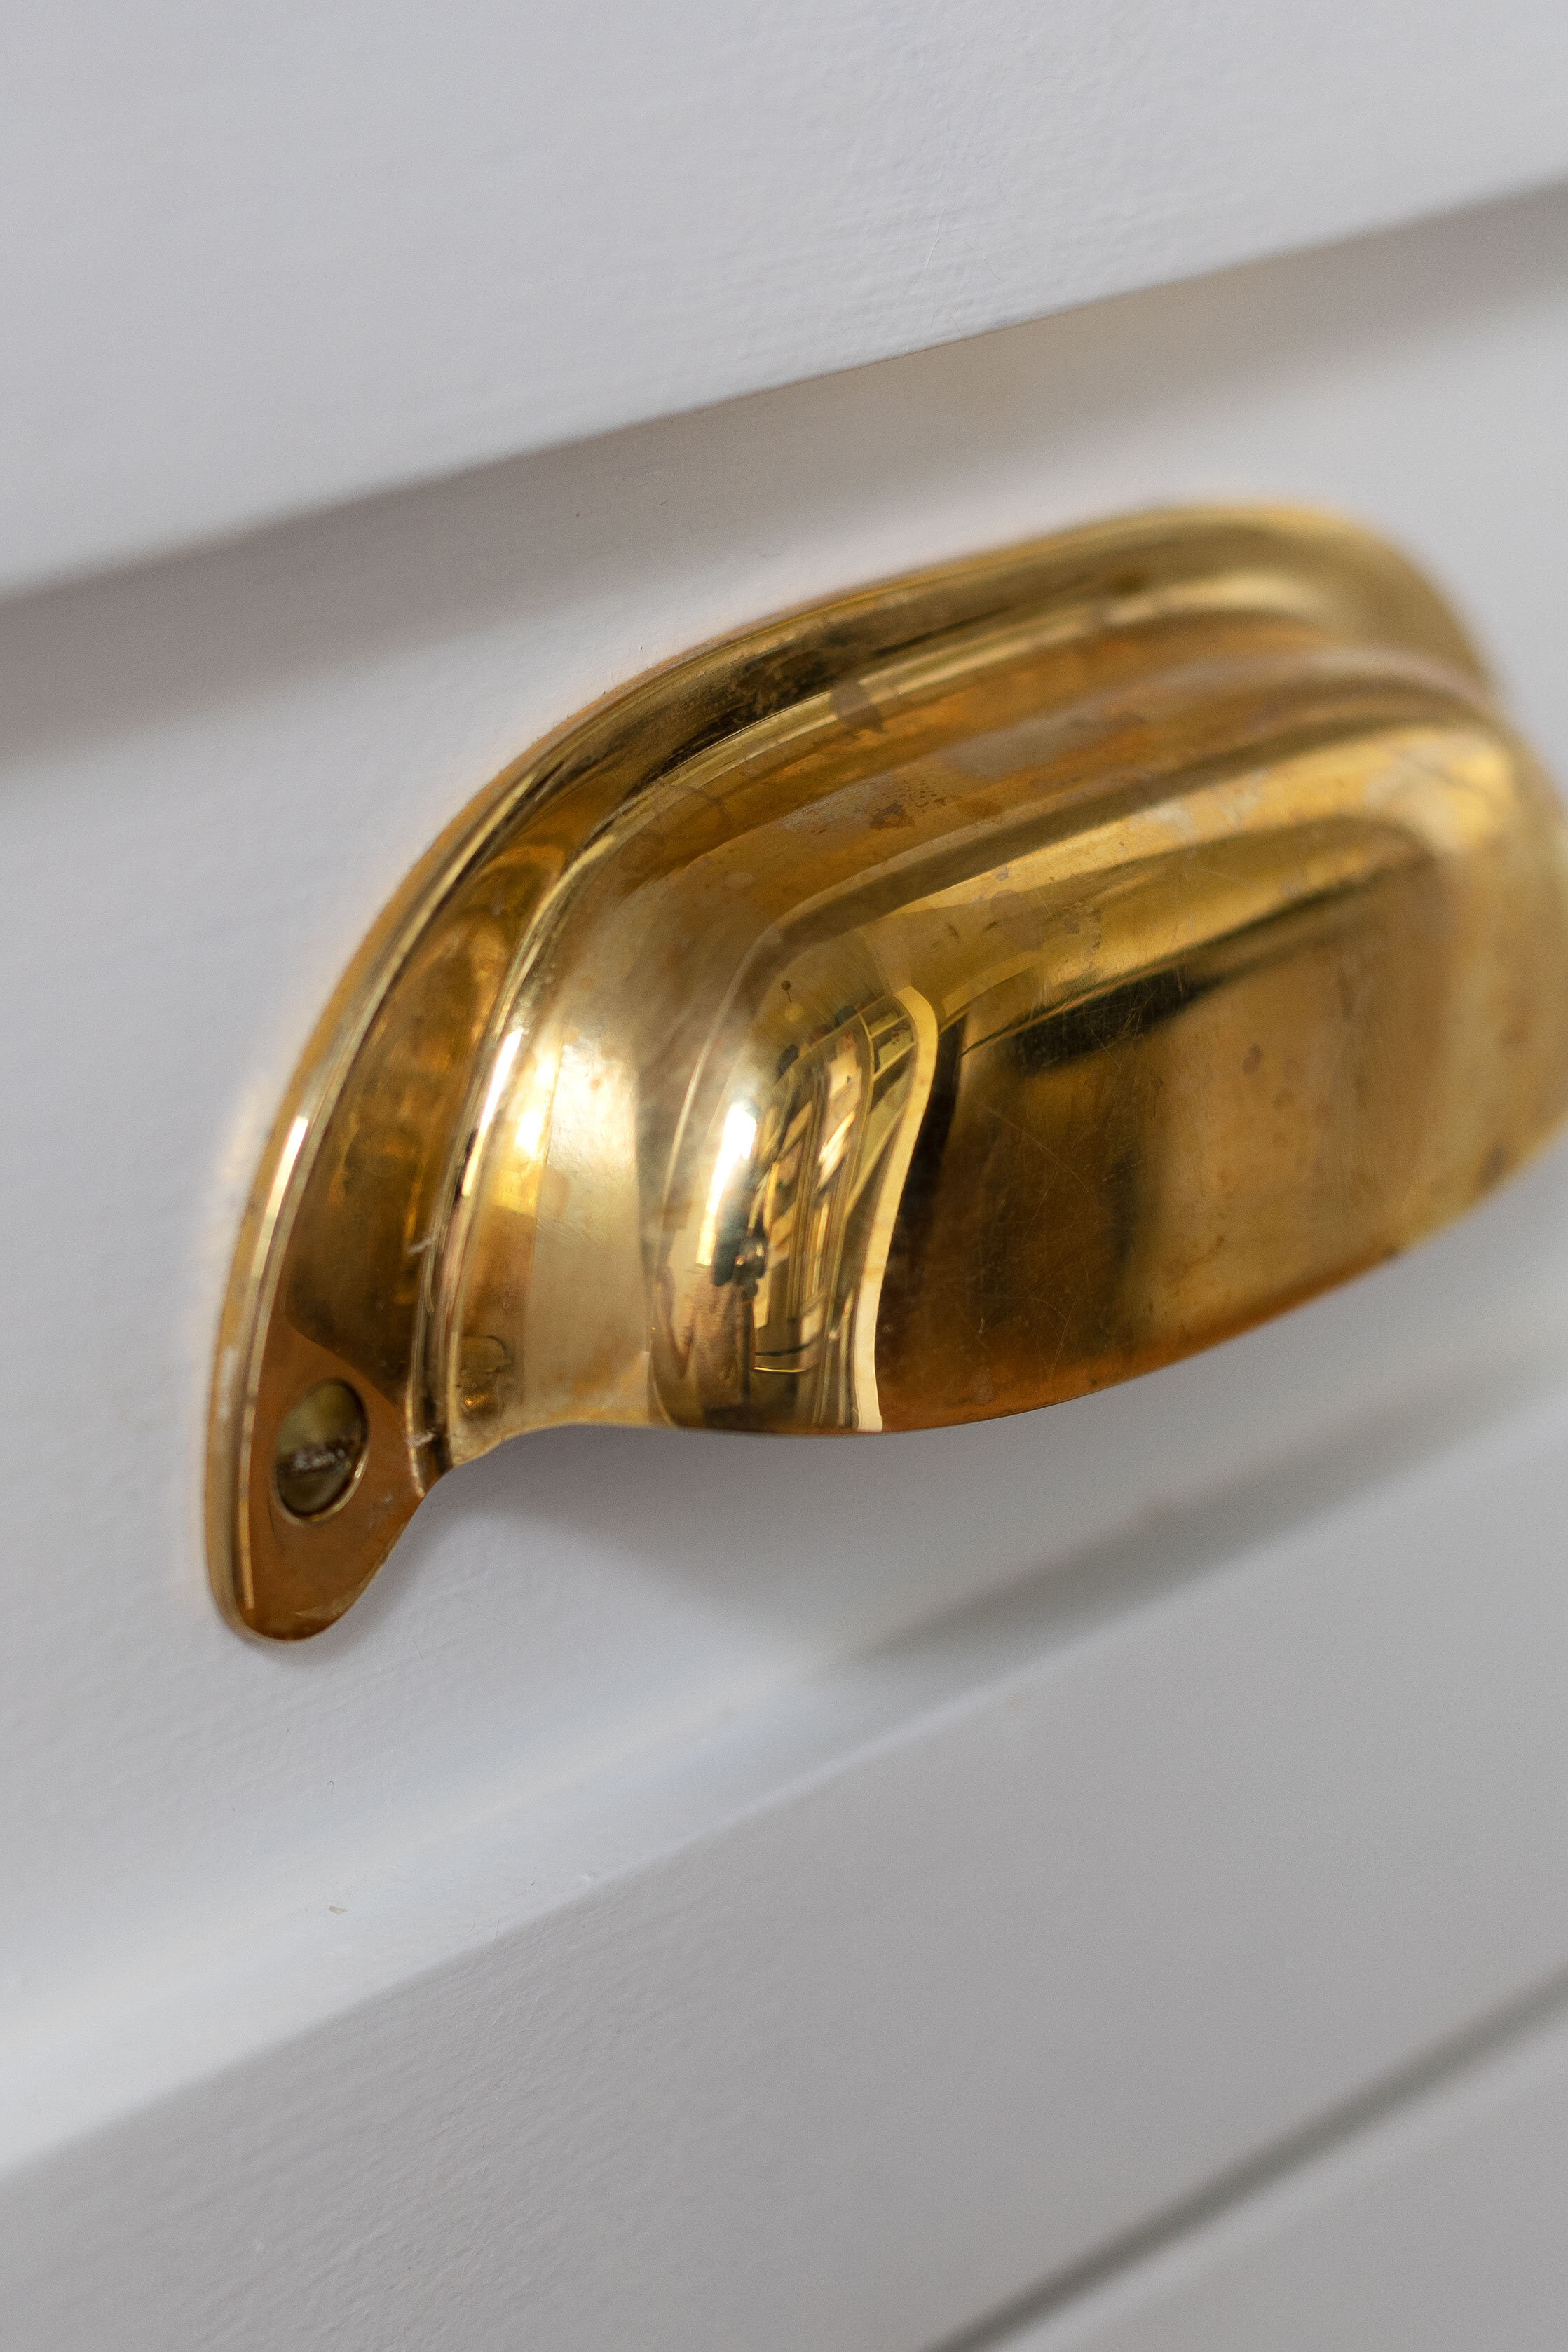 One Year of Age on Our Unlacquered Brass Hardware — The Grit and Polish